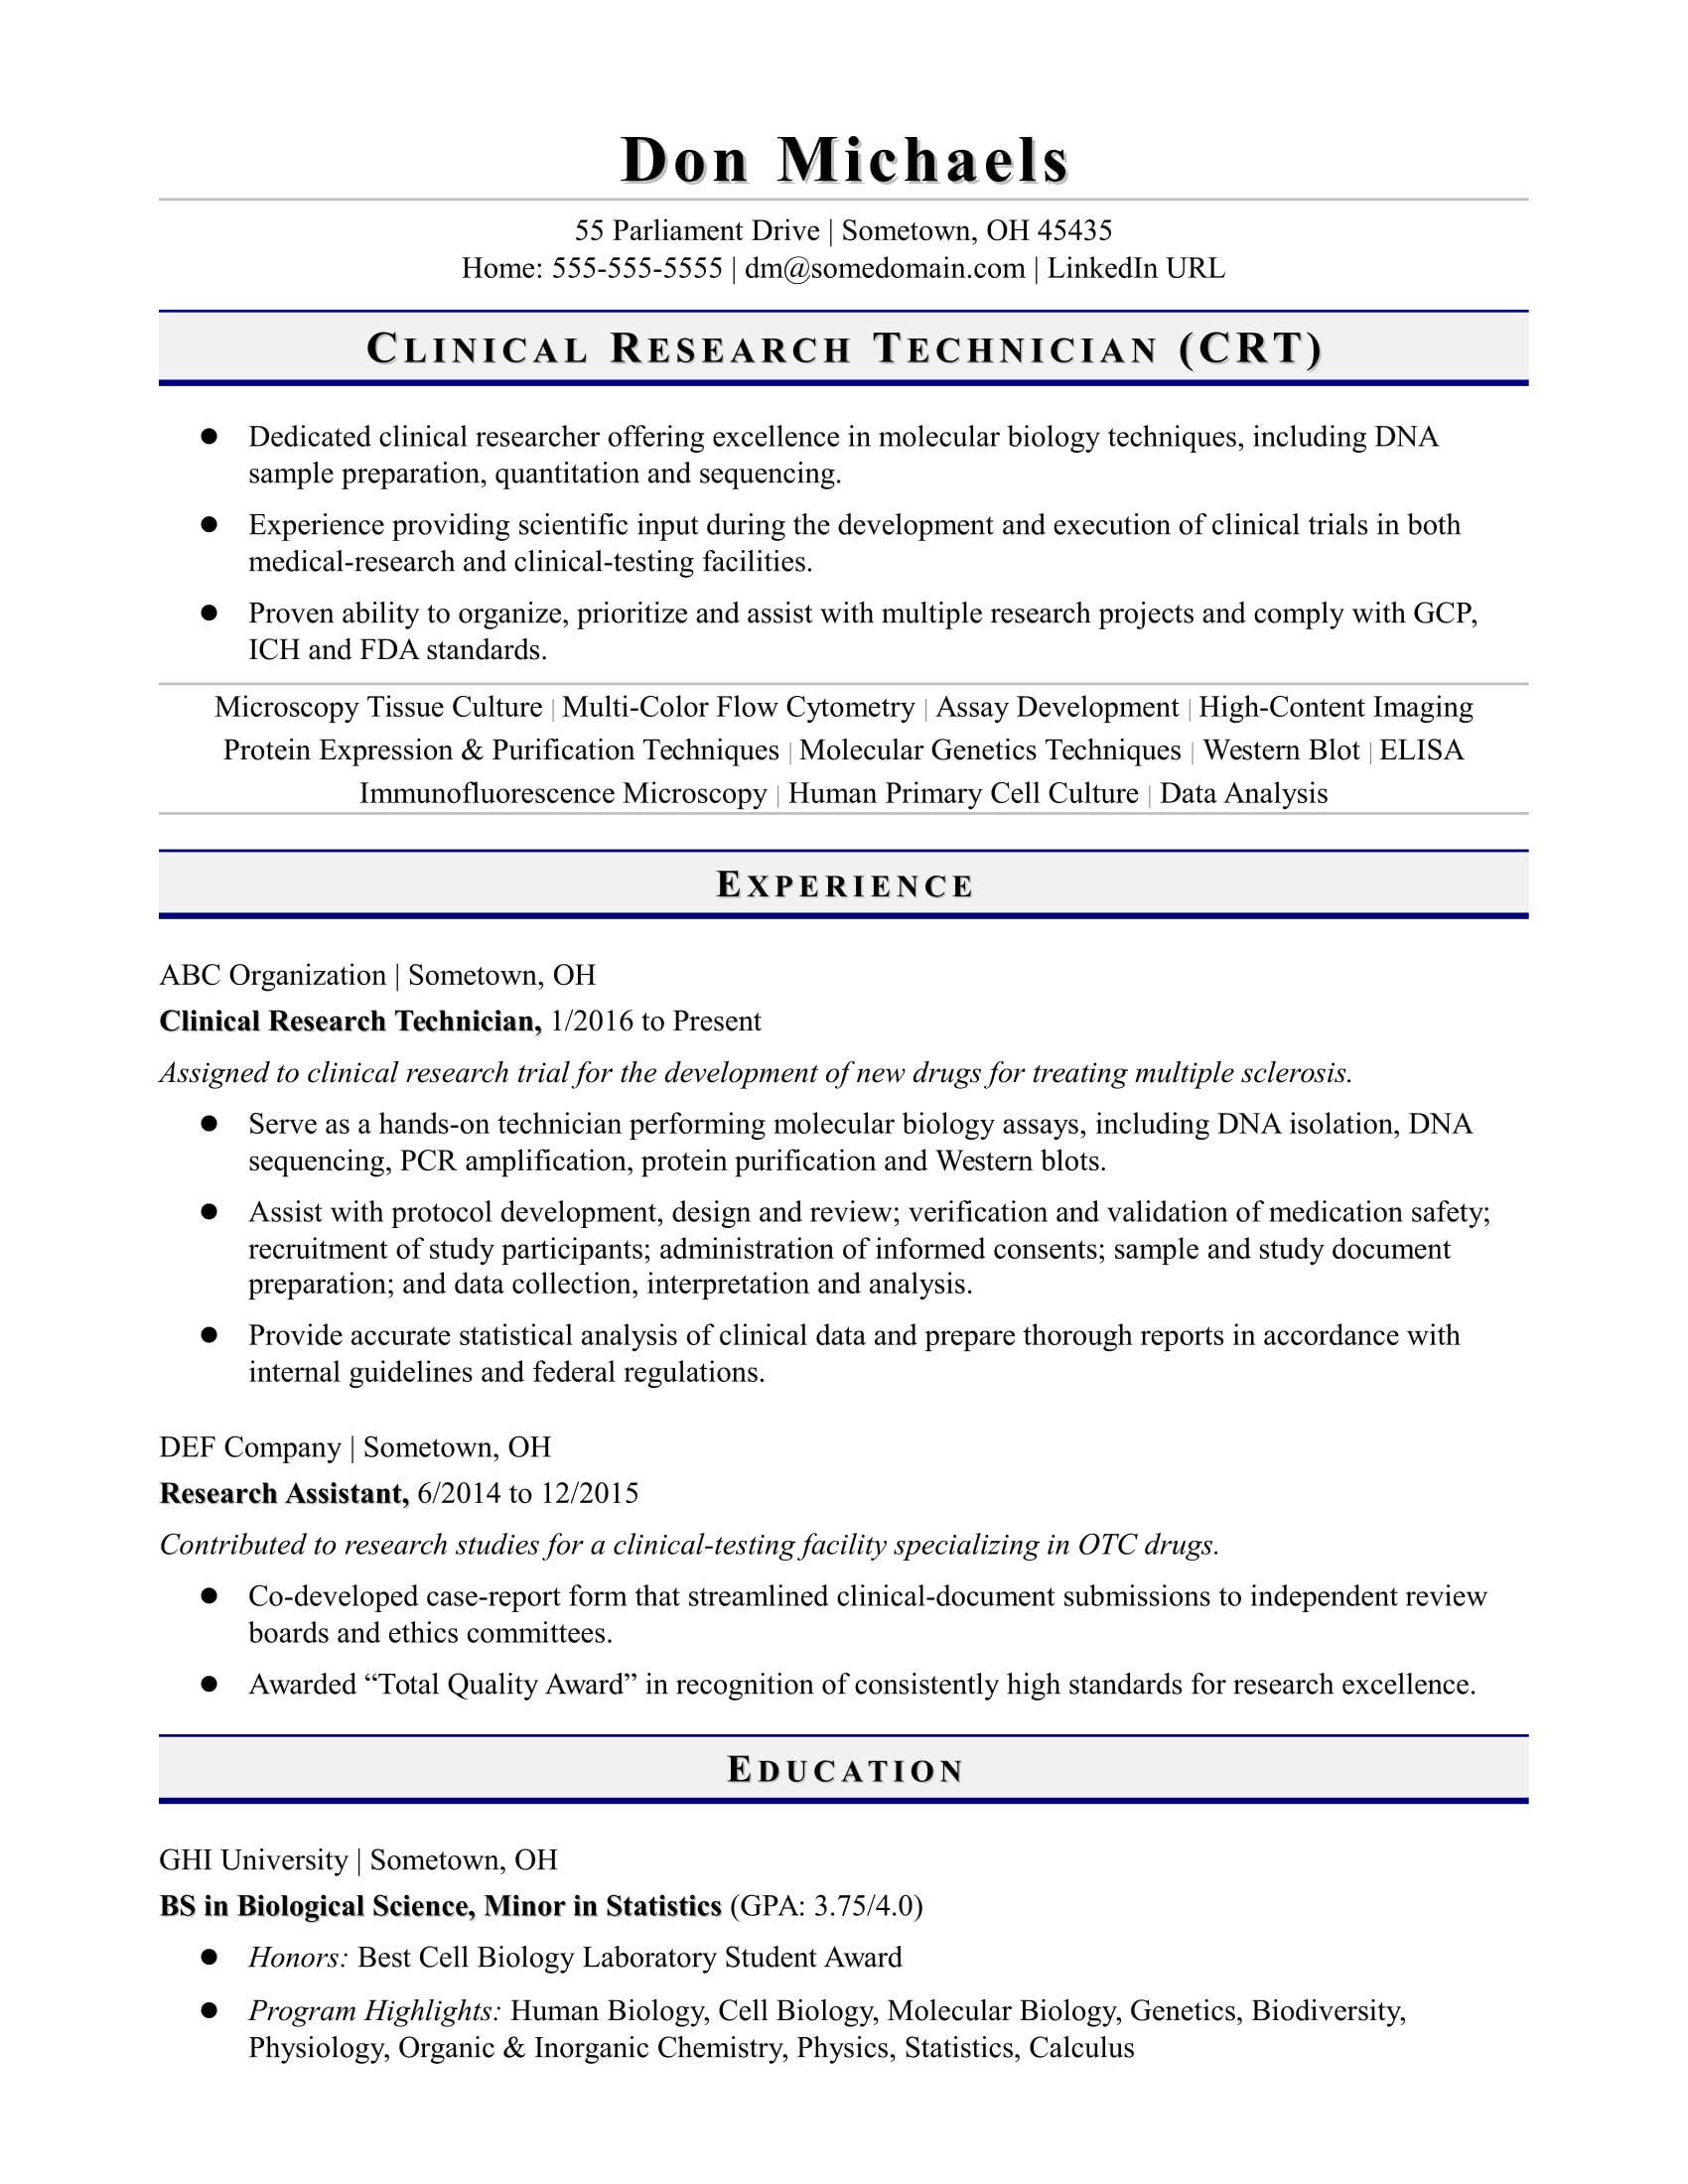 Sample Resume for Experience Research Scientist Entry-level Research Technician Resume Sample Monster.com